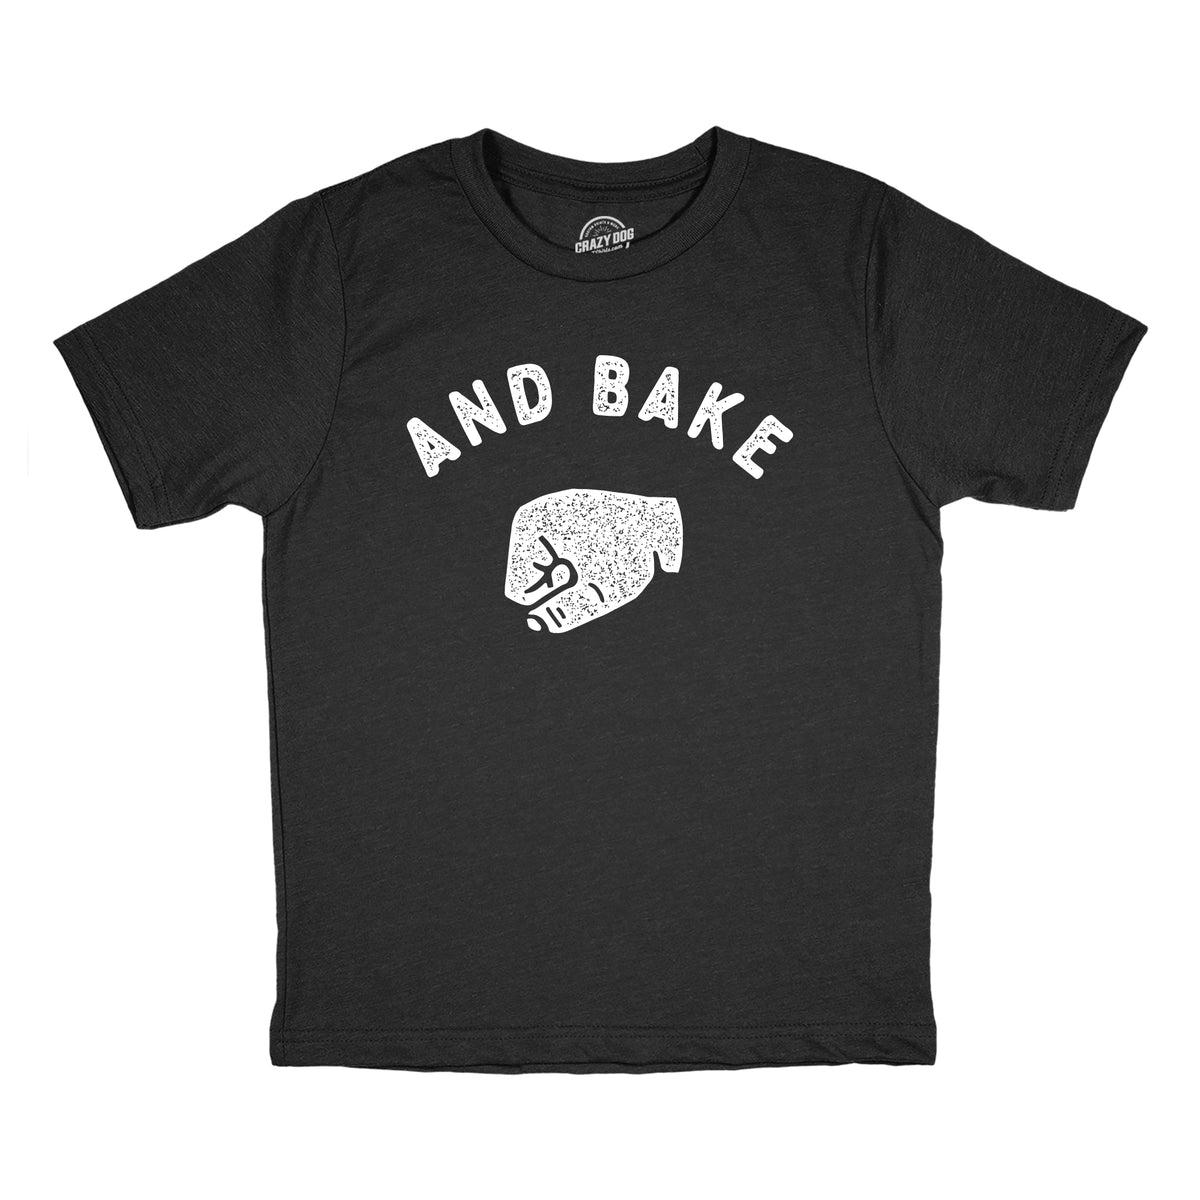 Funny Heather Black - BAKE And Bake Youth T Shirt Nerdy sarcastic Tee